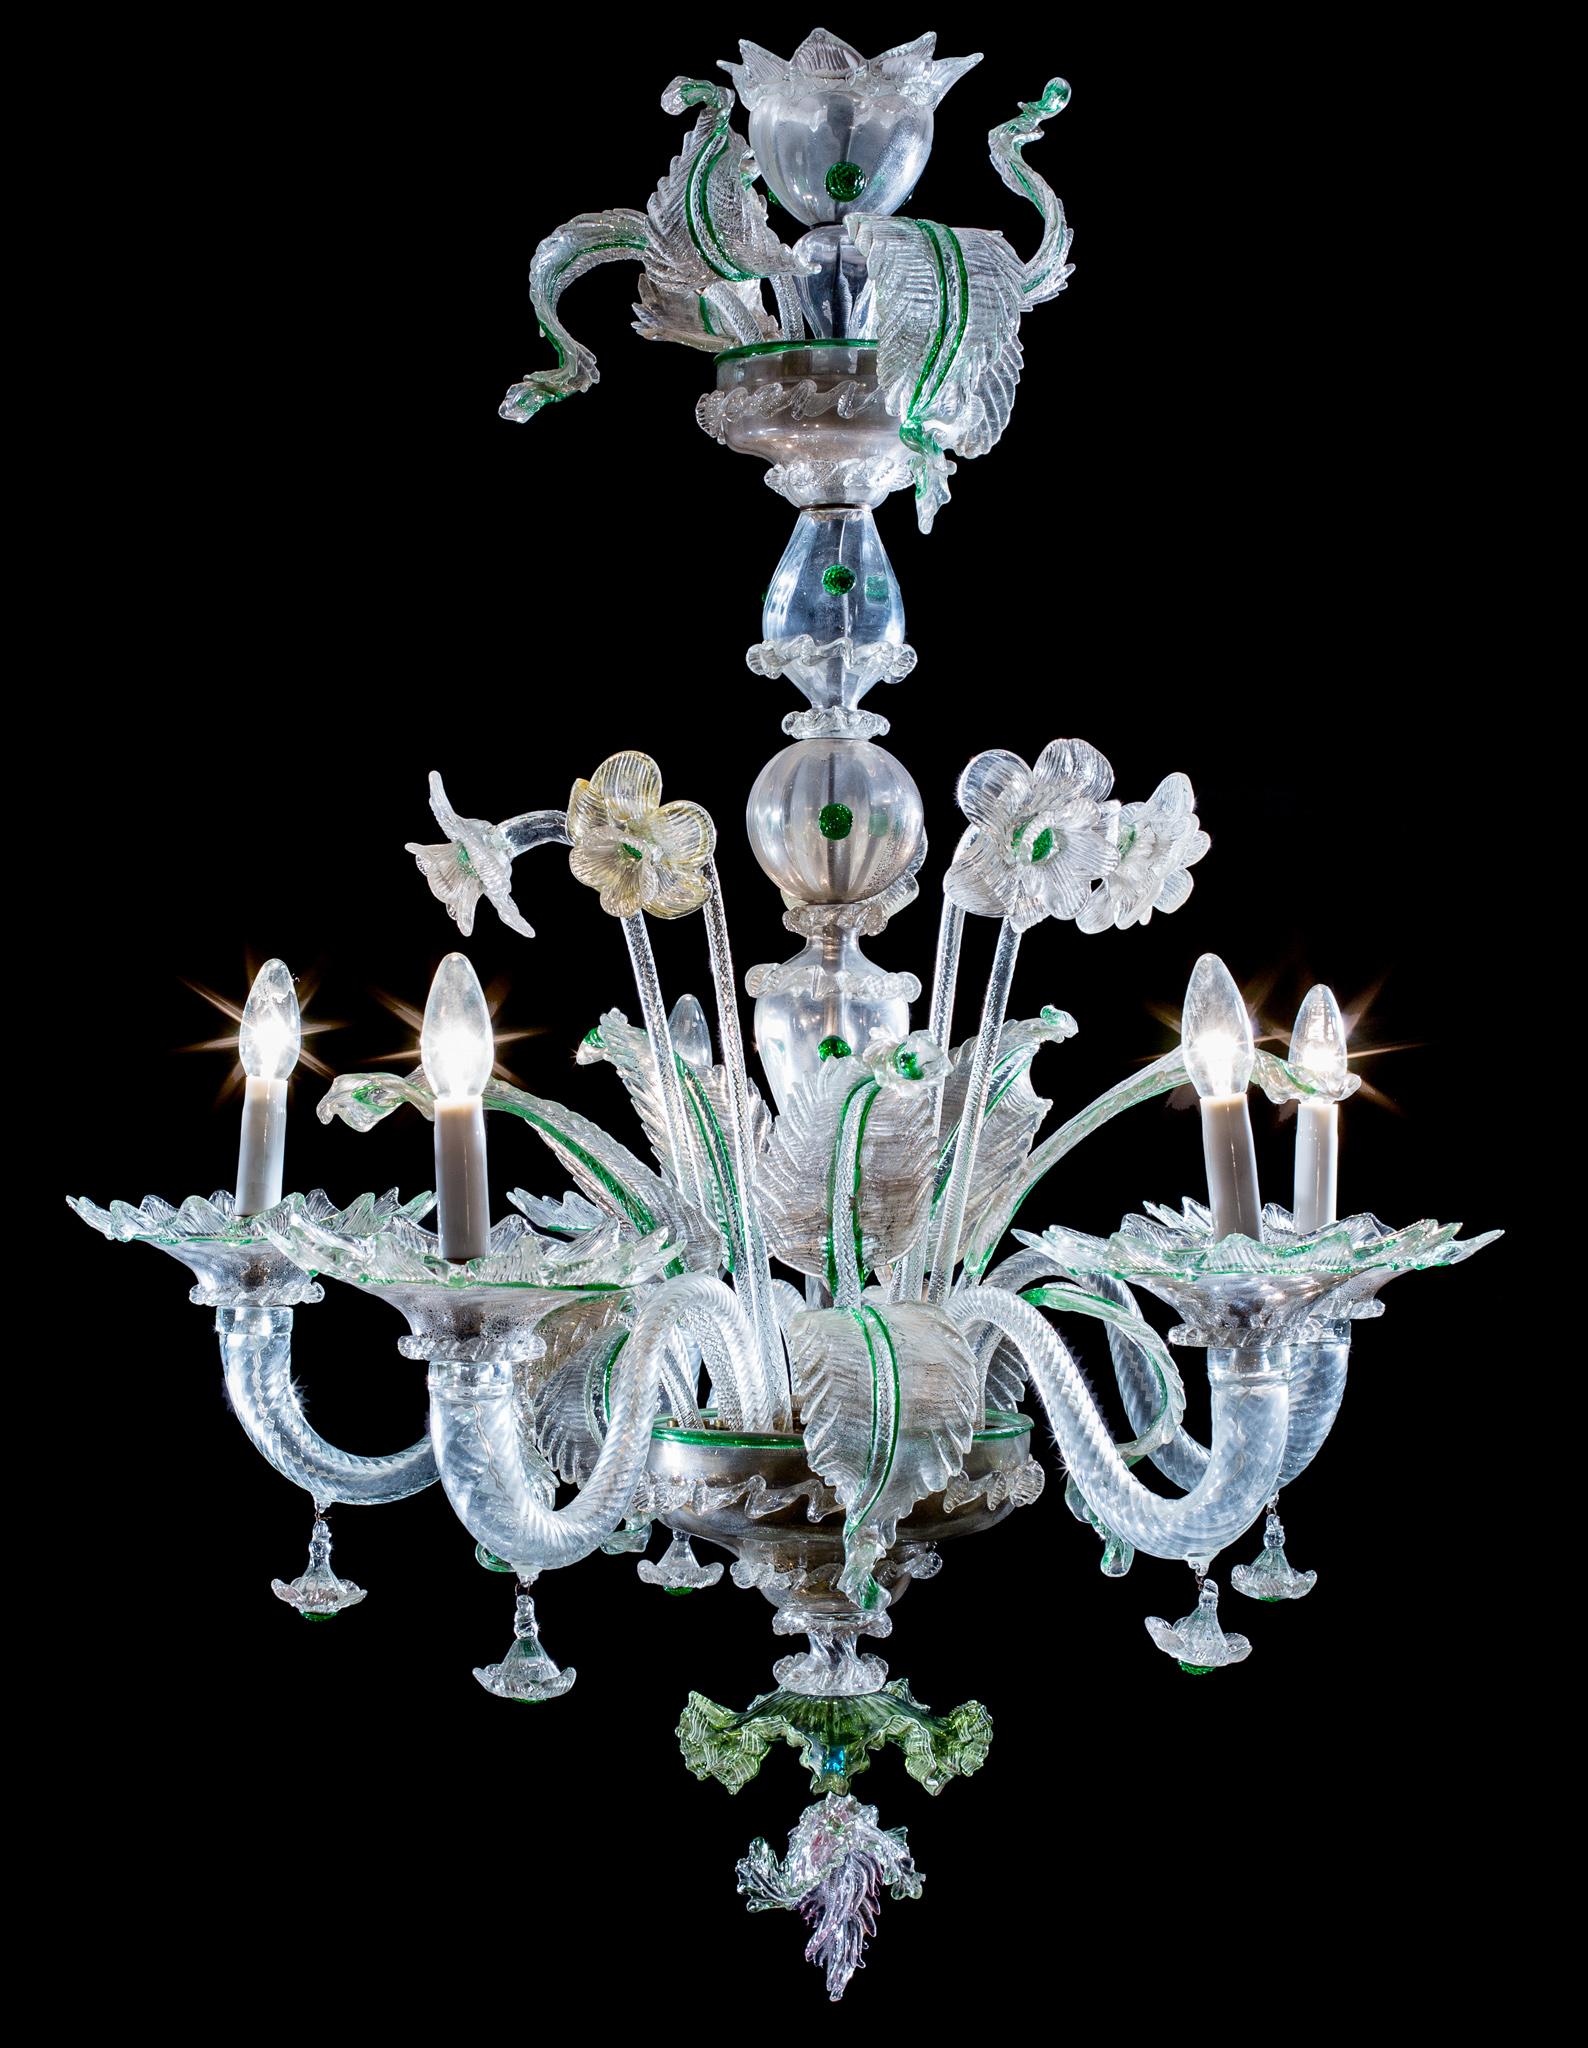 This lamp is a fine example of the unmistakable Murano style, which mixes the classic chandelier structure of a central axis made up of stacked hand-blown balusters and spindles, with a variety of more fluid, dynamic and sculptural floral and